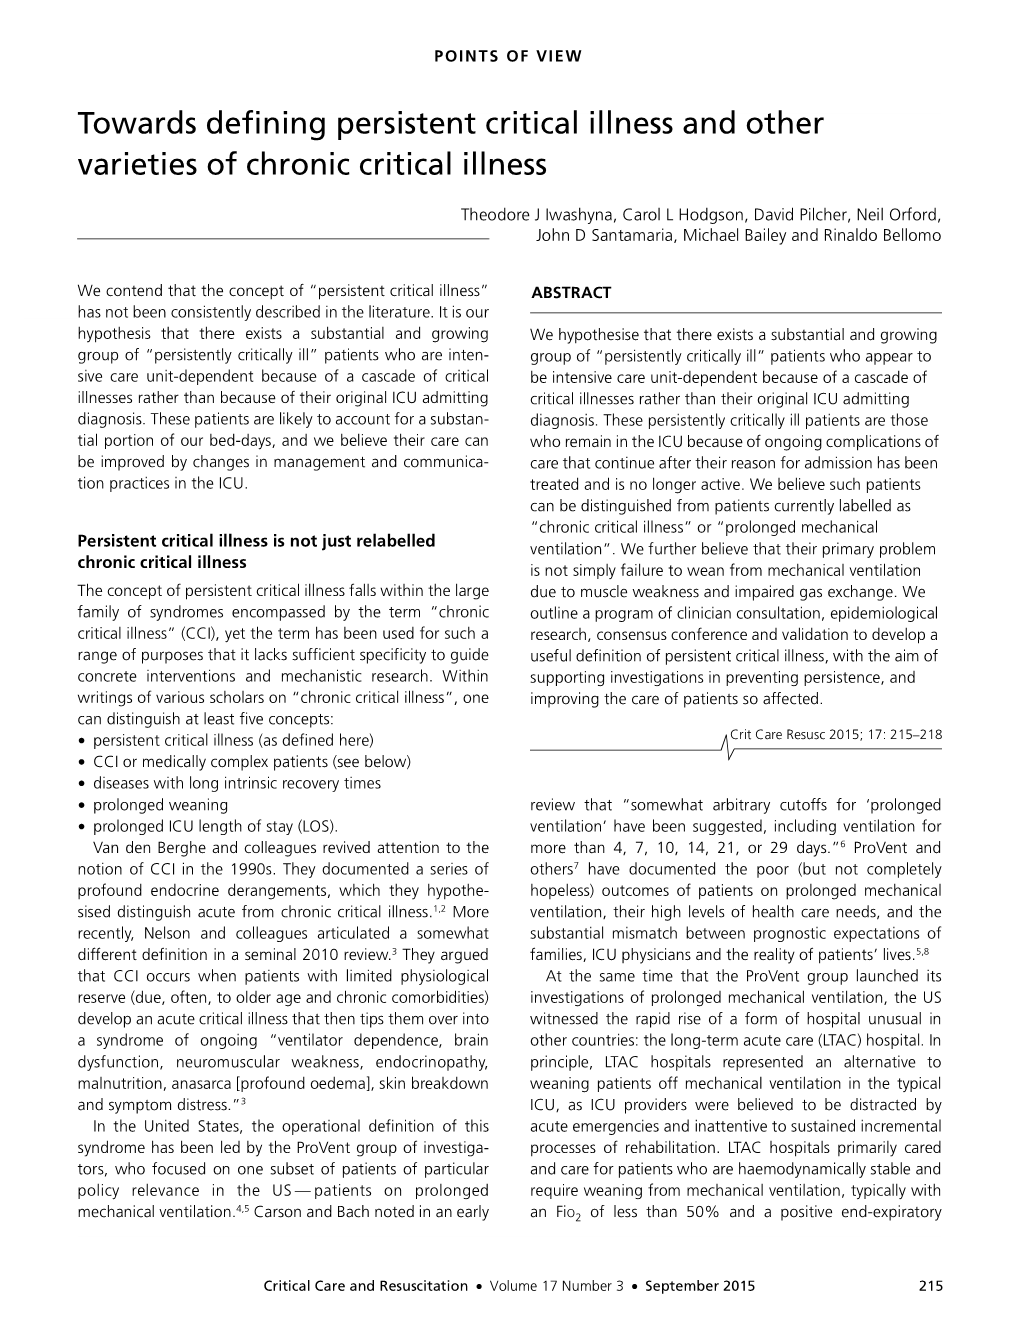 Towards Defining Persistent Critical Illness and Other Varieties of Chronic Critical Illness